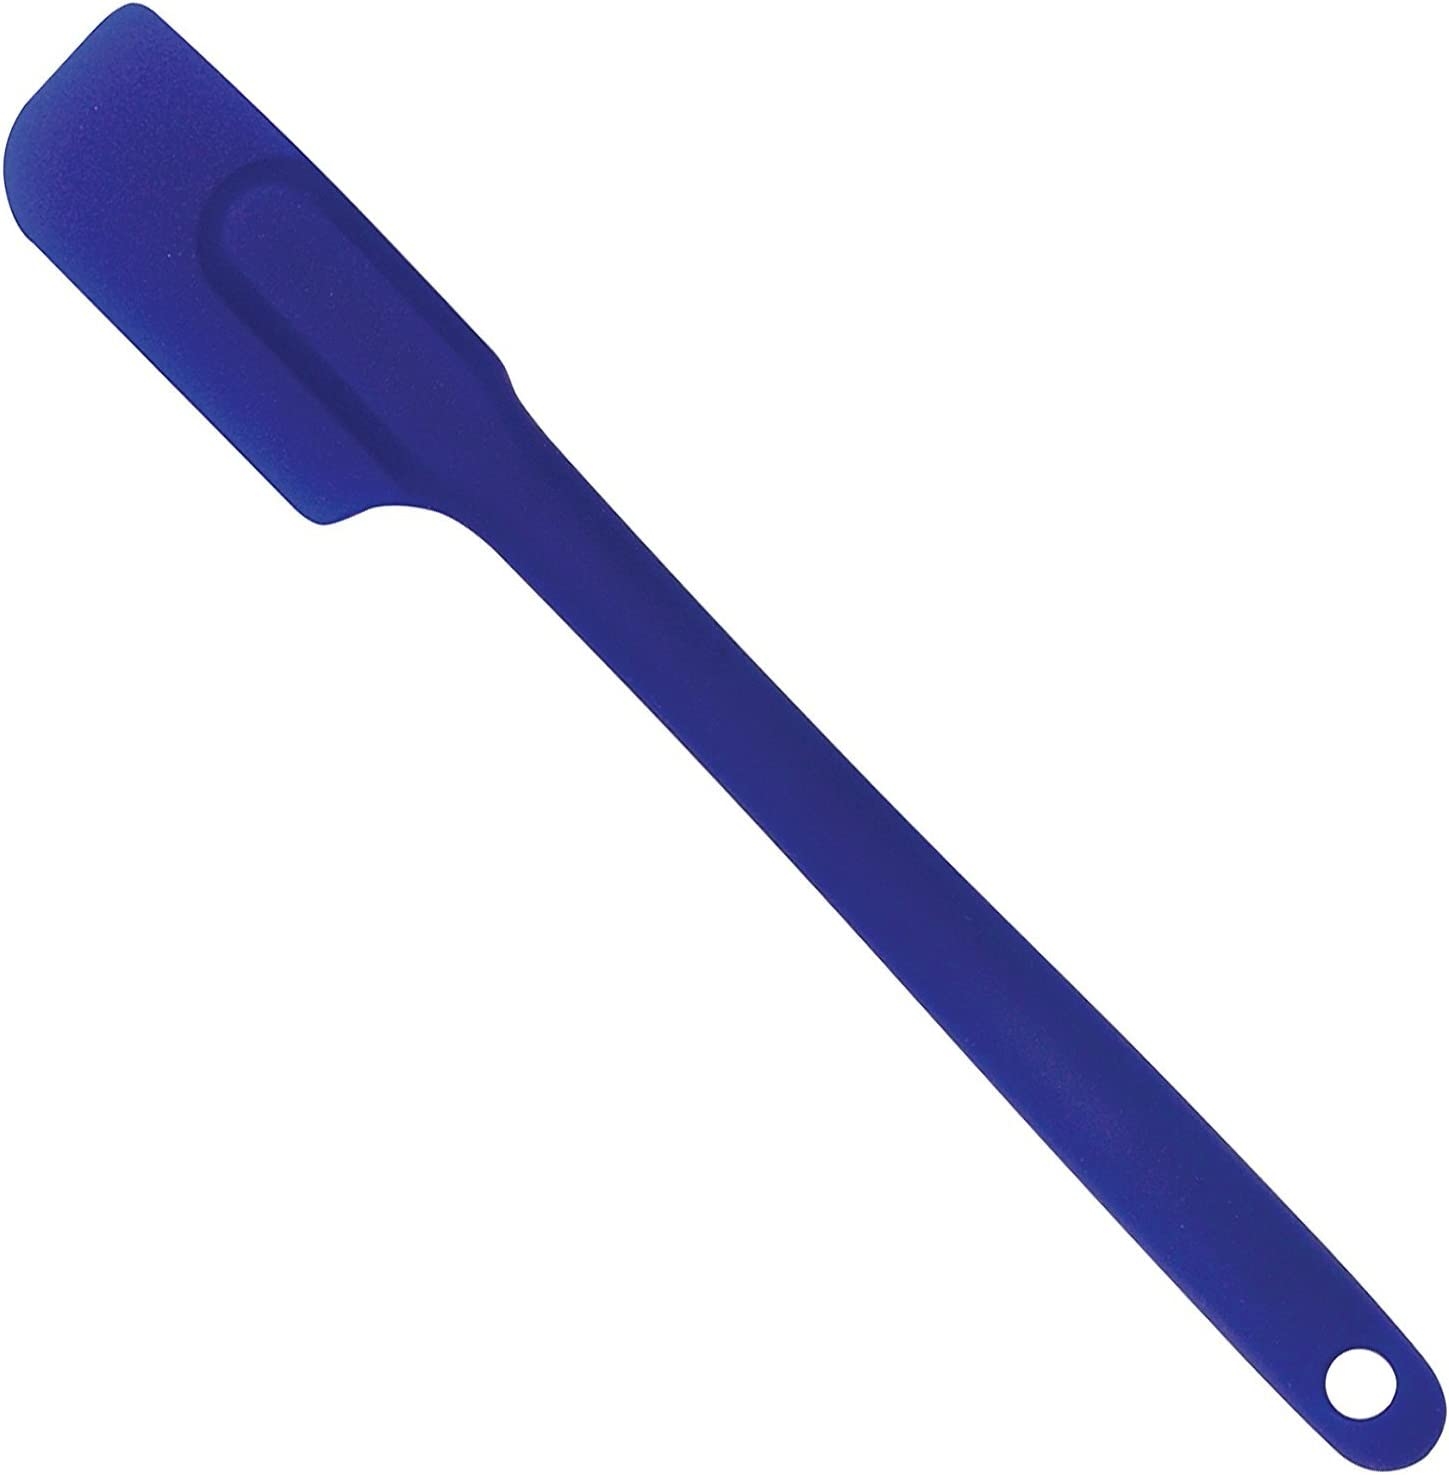 Mrs. Anderson’s Baking Slim Spatula, Heat-Resistant Flexible Nonstick Silicone, 10-Inches, Blueberry Import To Shop ×Product